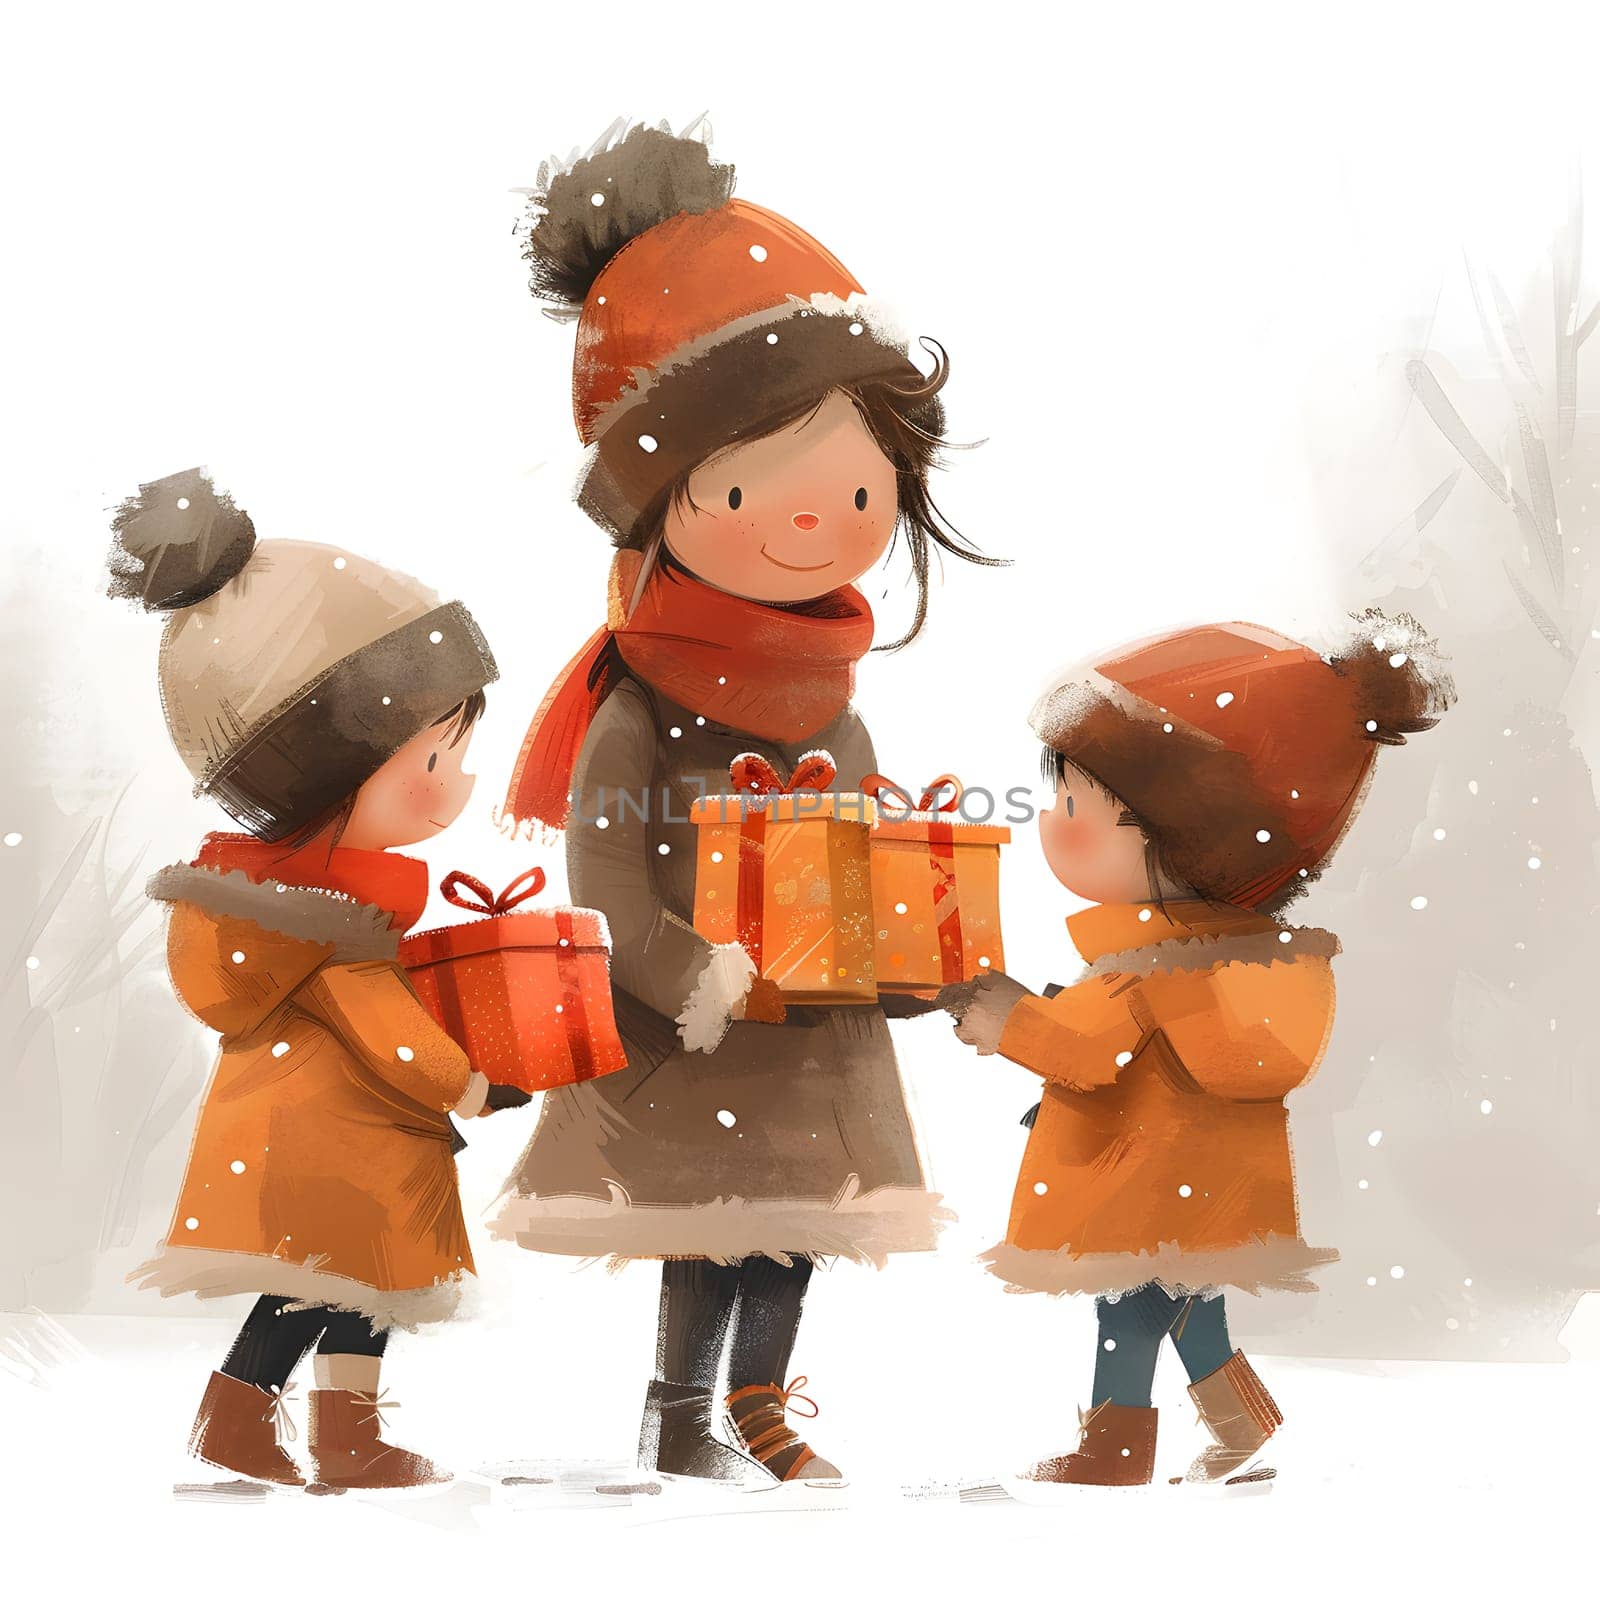 A woman and two kids playing in the snow, holding gifts by Nadtochiy